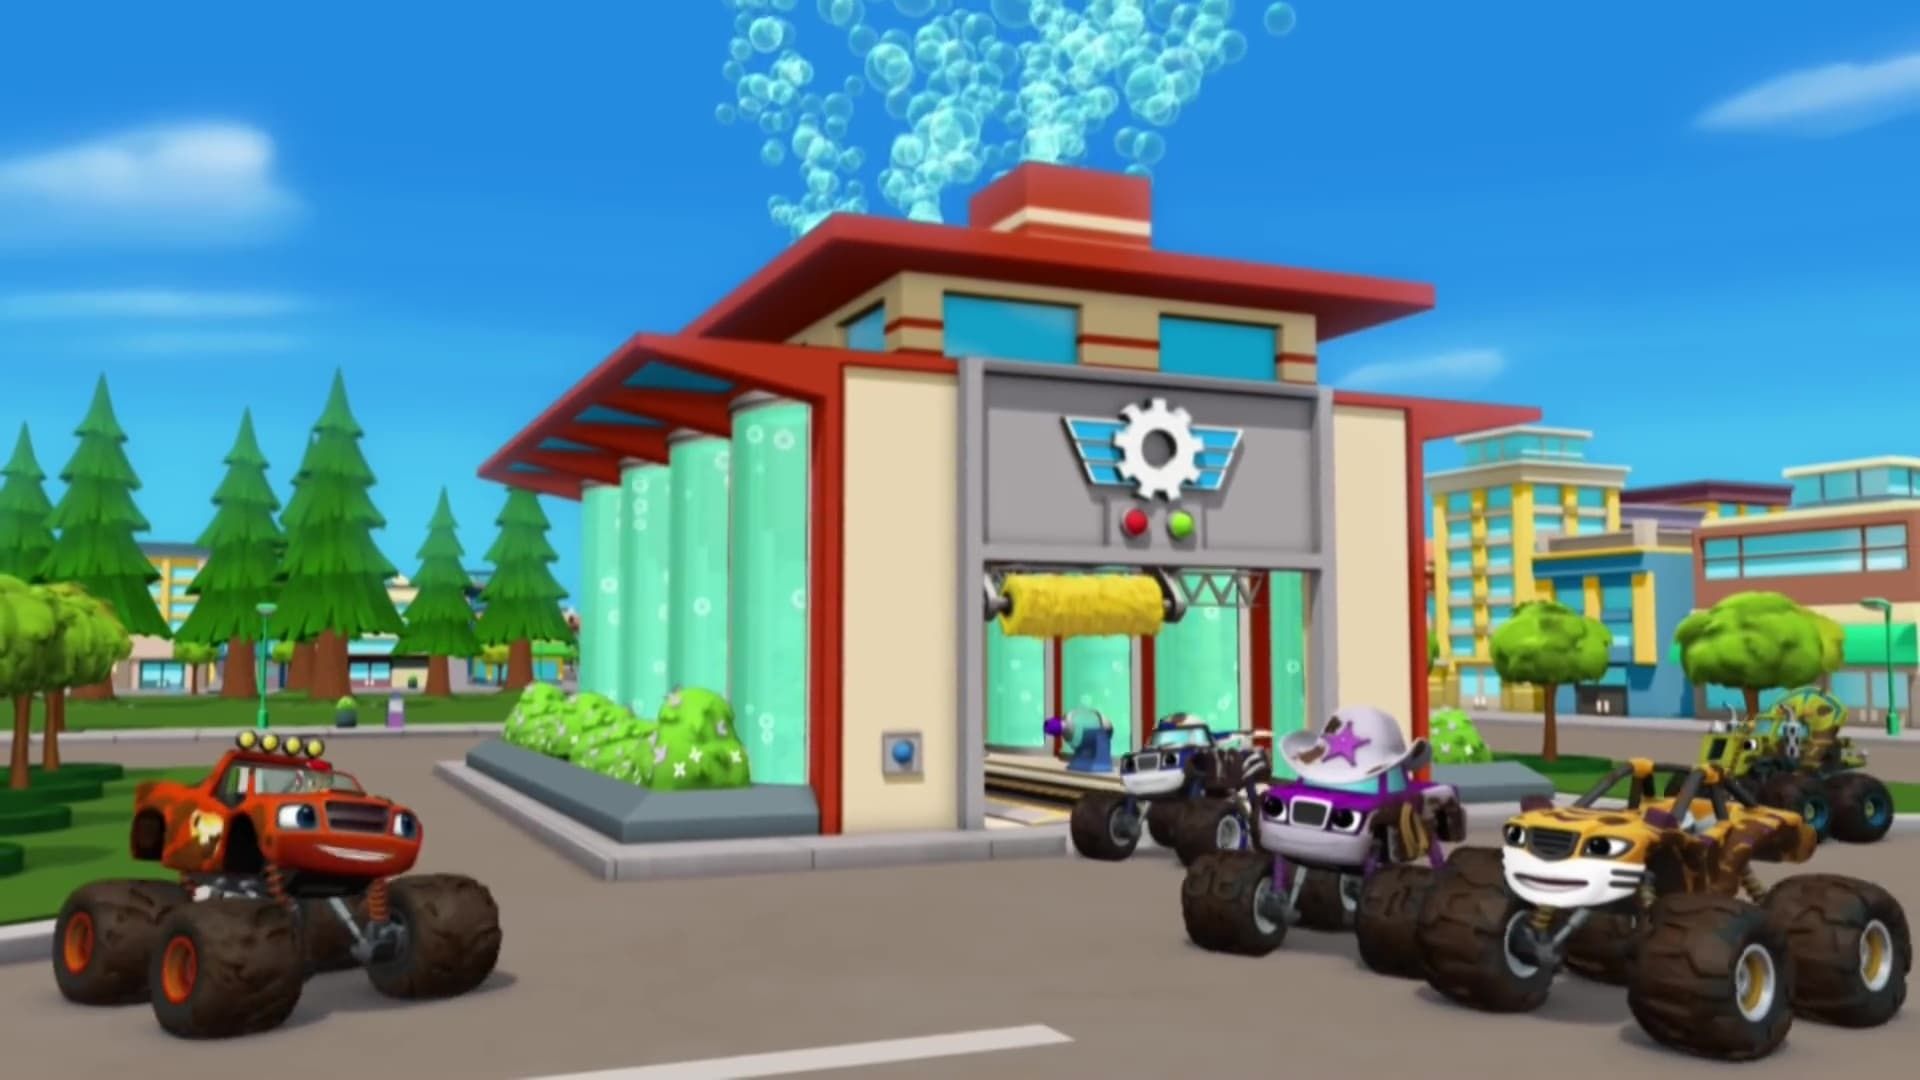 Blaze and the Monster Machines background